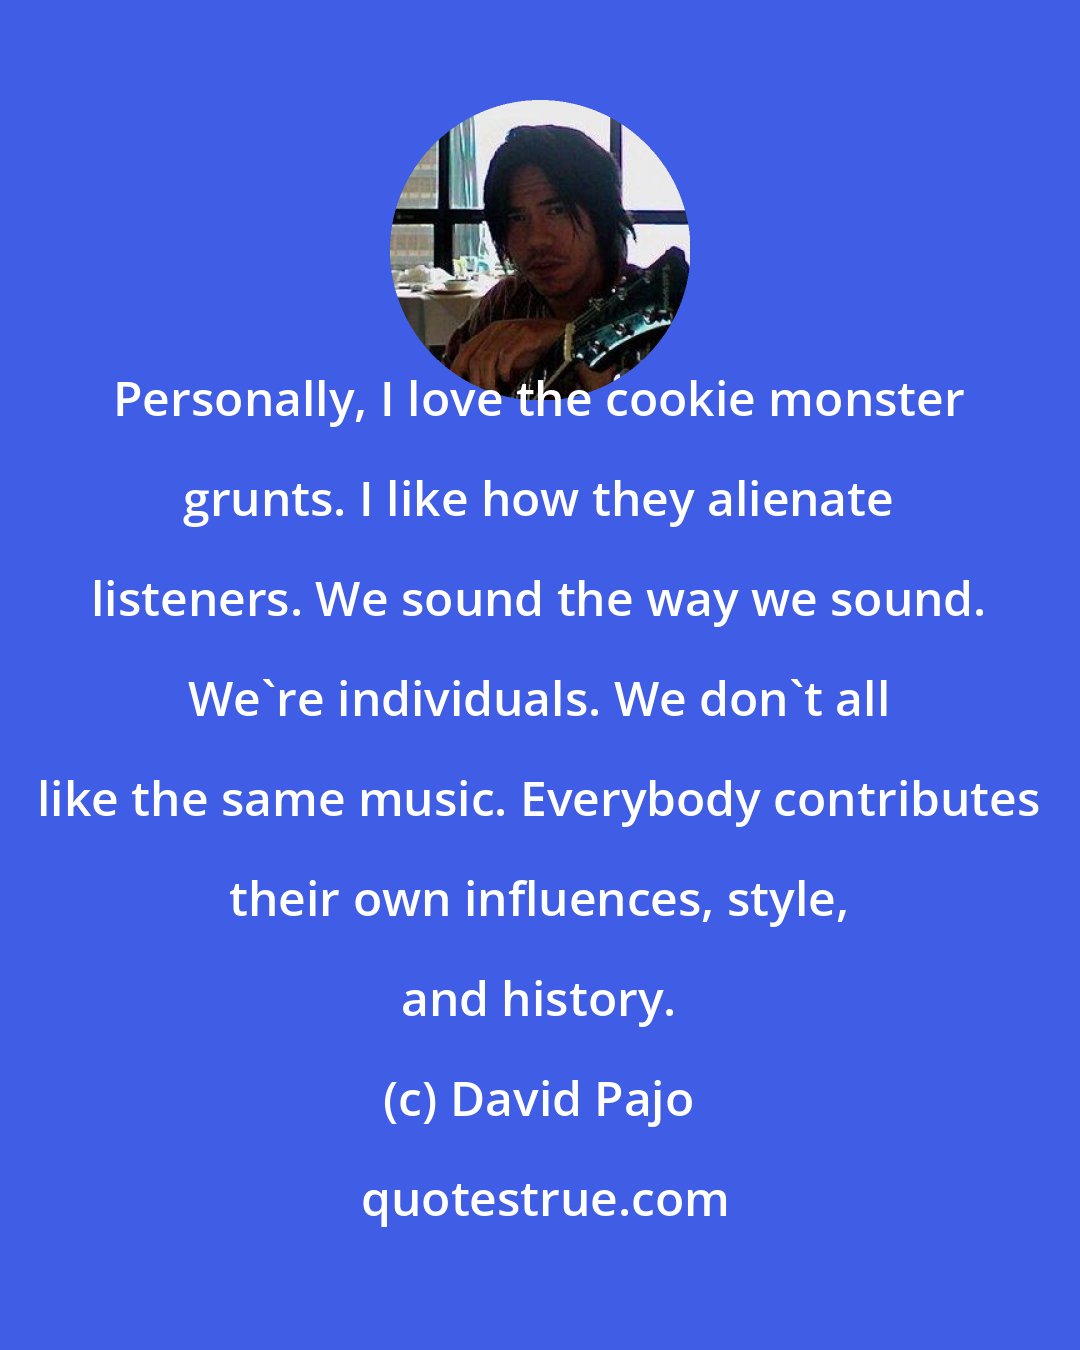 David Pajo: Personally, I love the cookie monster grunts. I like how they alienate listeners. We sound the way we sound. We're individuals. We don't all like the same music. Everybody contributes their own influences, style, and history.